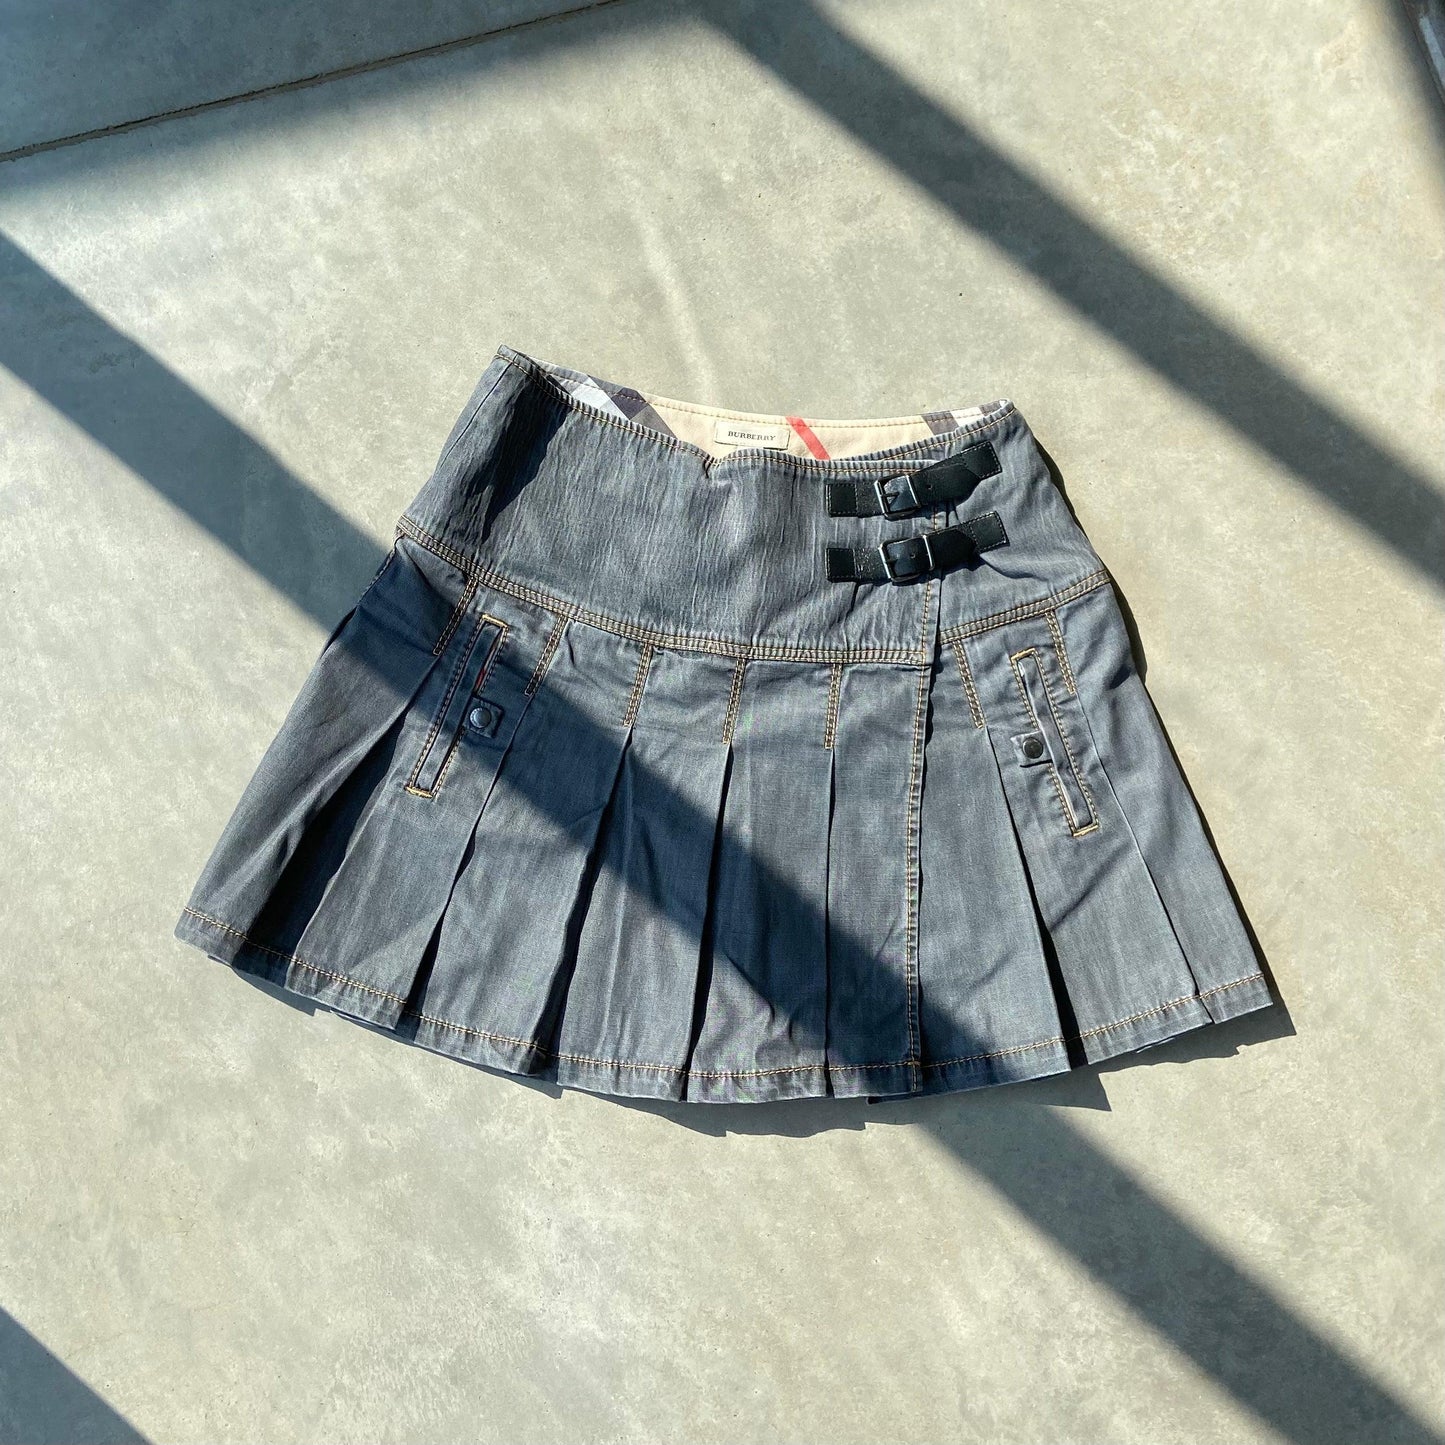 BURBERRY GREY PLEATED MINI SKIRT - Known Source